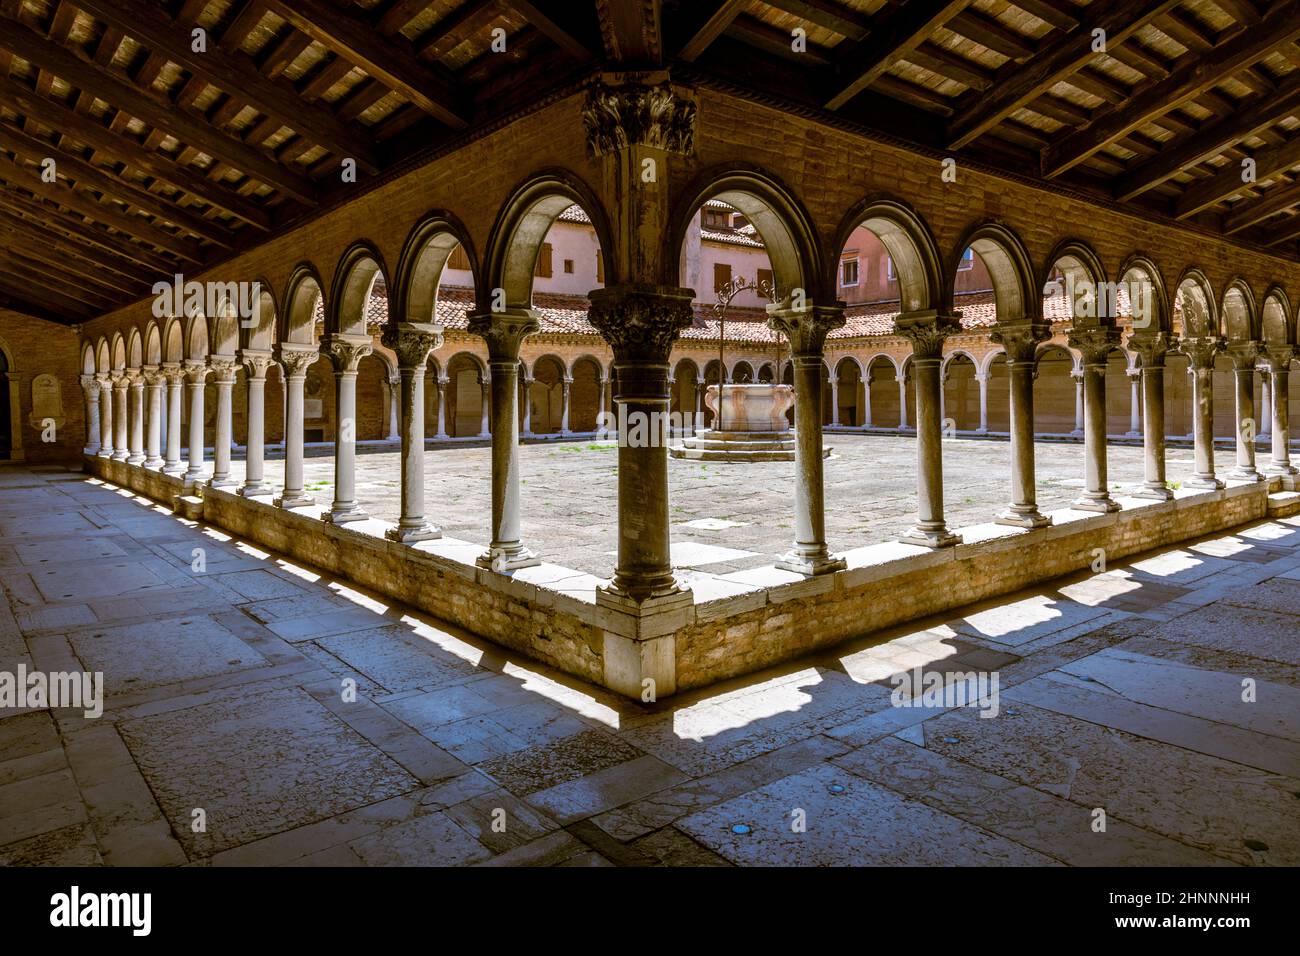 Fascinating architecture and details inside Chiesa di San Michele, Venice Stock Photo